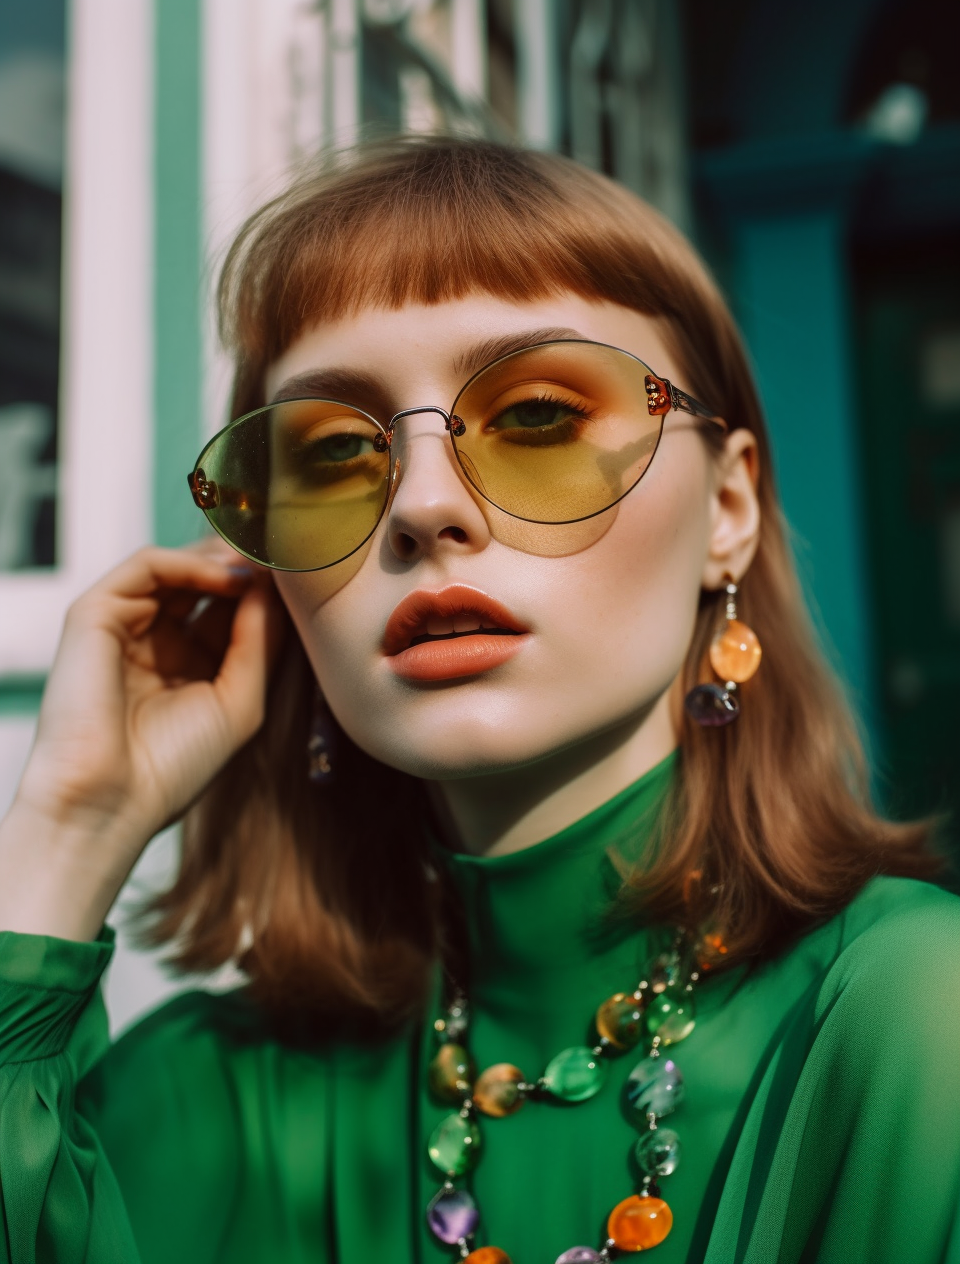 Close-up AI-generated image of a woman with sunglasses, coral eye makeup, and a green turtleneck, standing in front of an aqua house, made with Midjourney